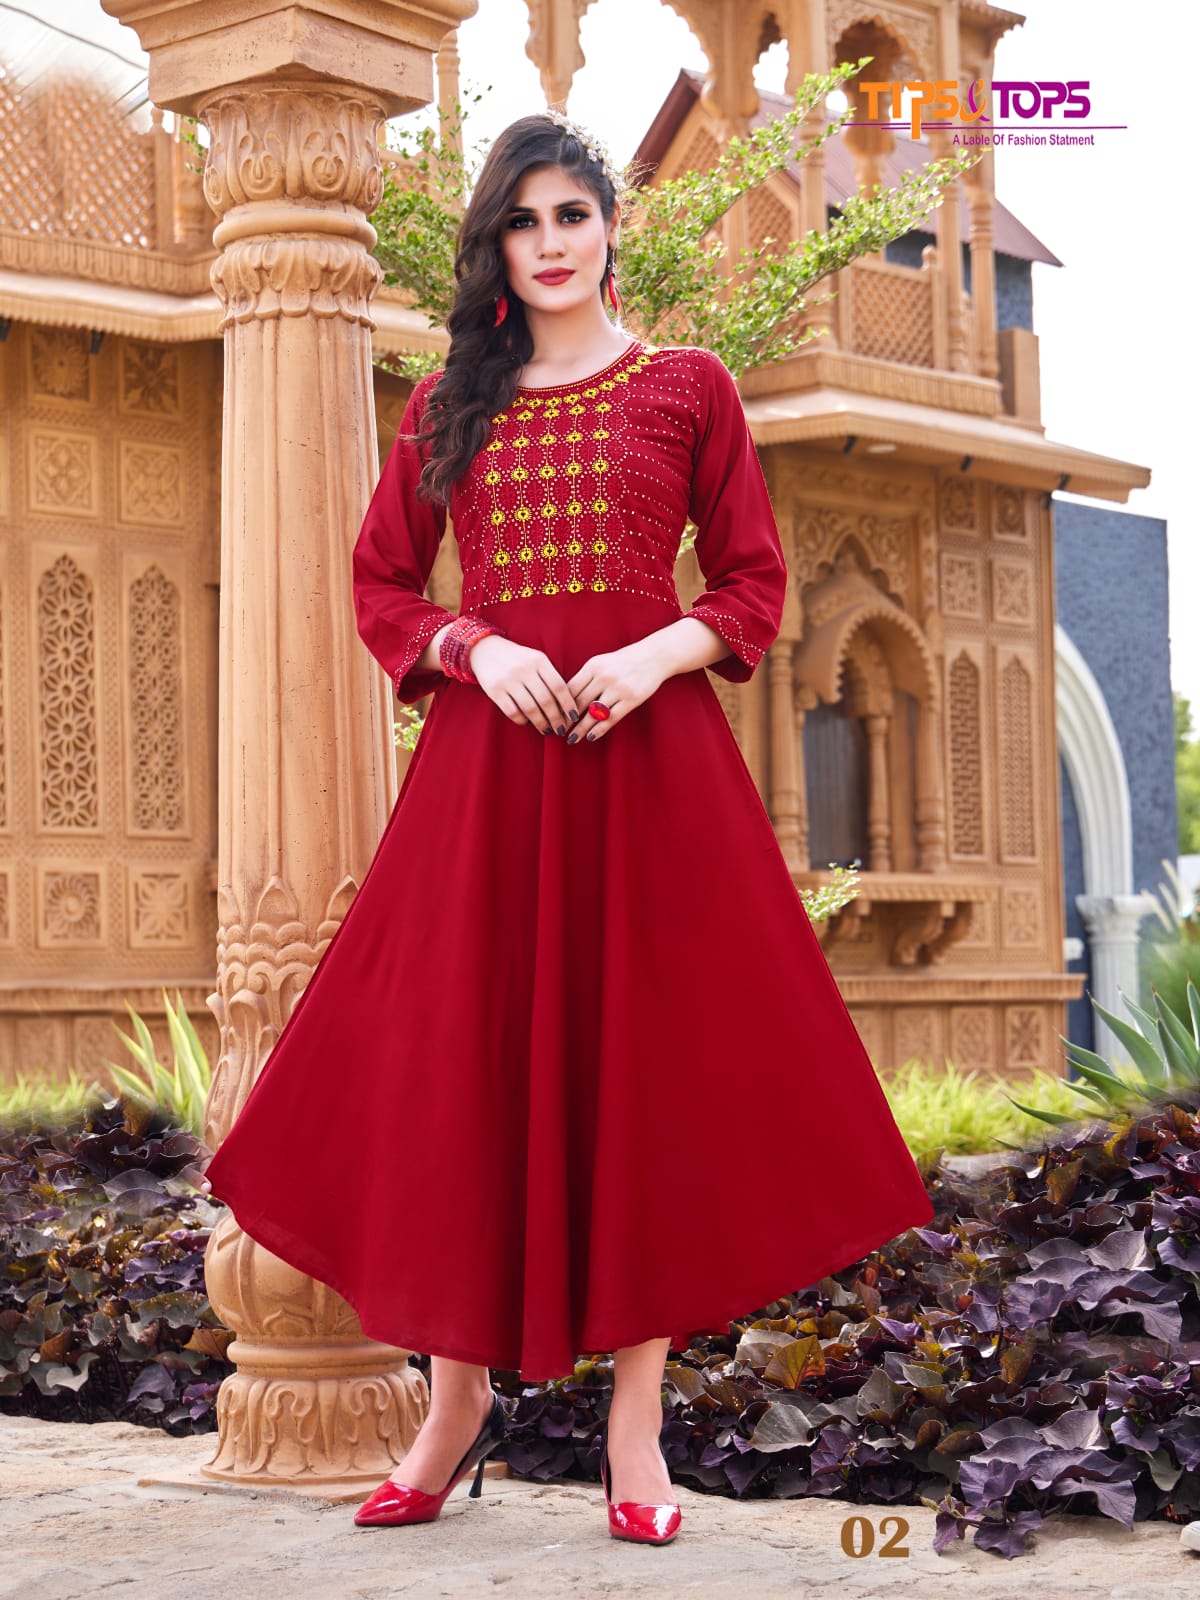 Craftsvilla - Rs. 999. Click here to buy: http://www.craftsvilla .com/catalog/product/view/id/2330029/s/new-gorgeous-exclusive-kurtis-905/ |  Facebook